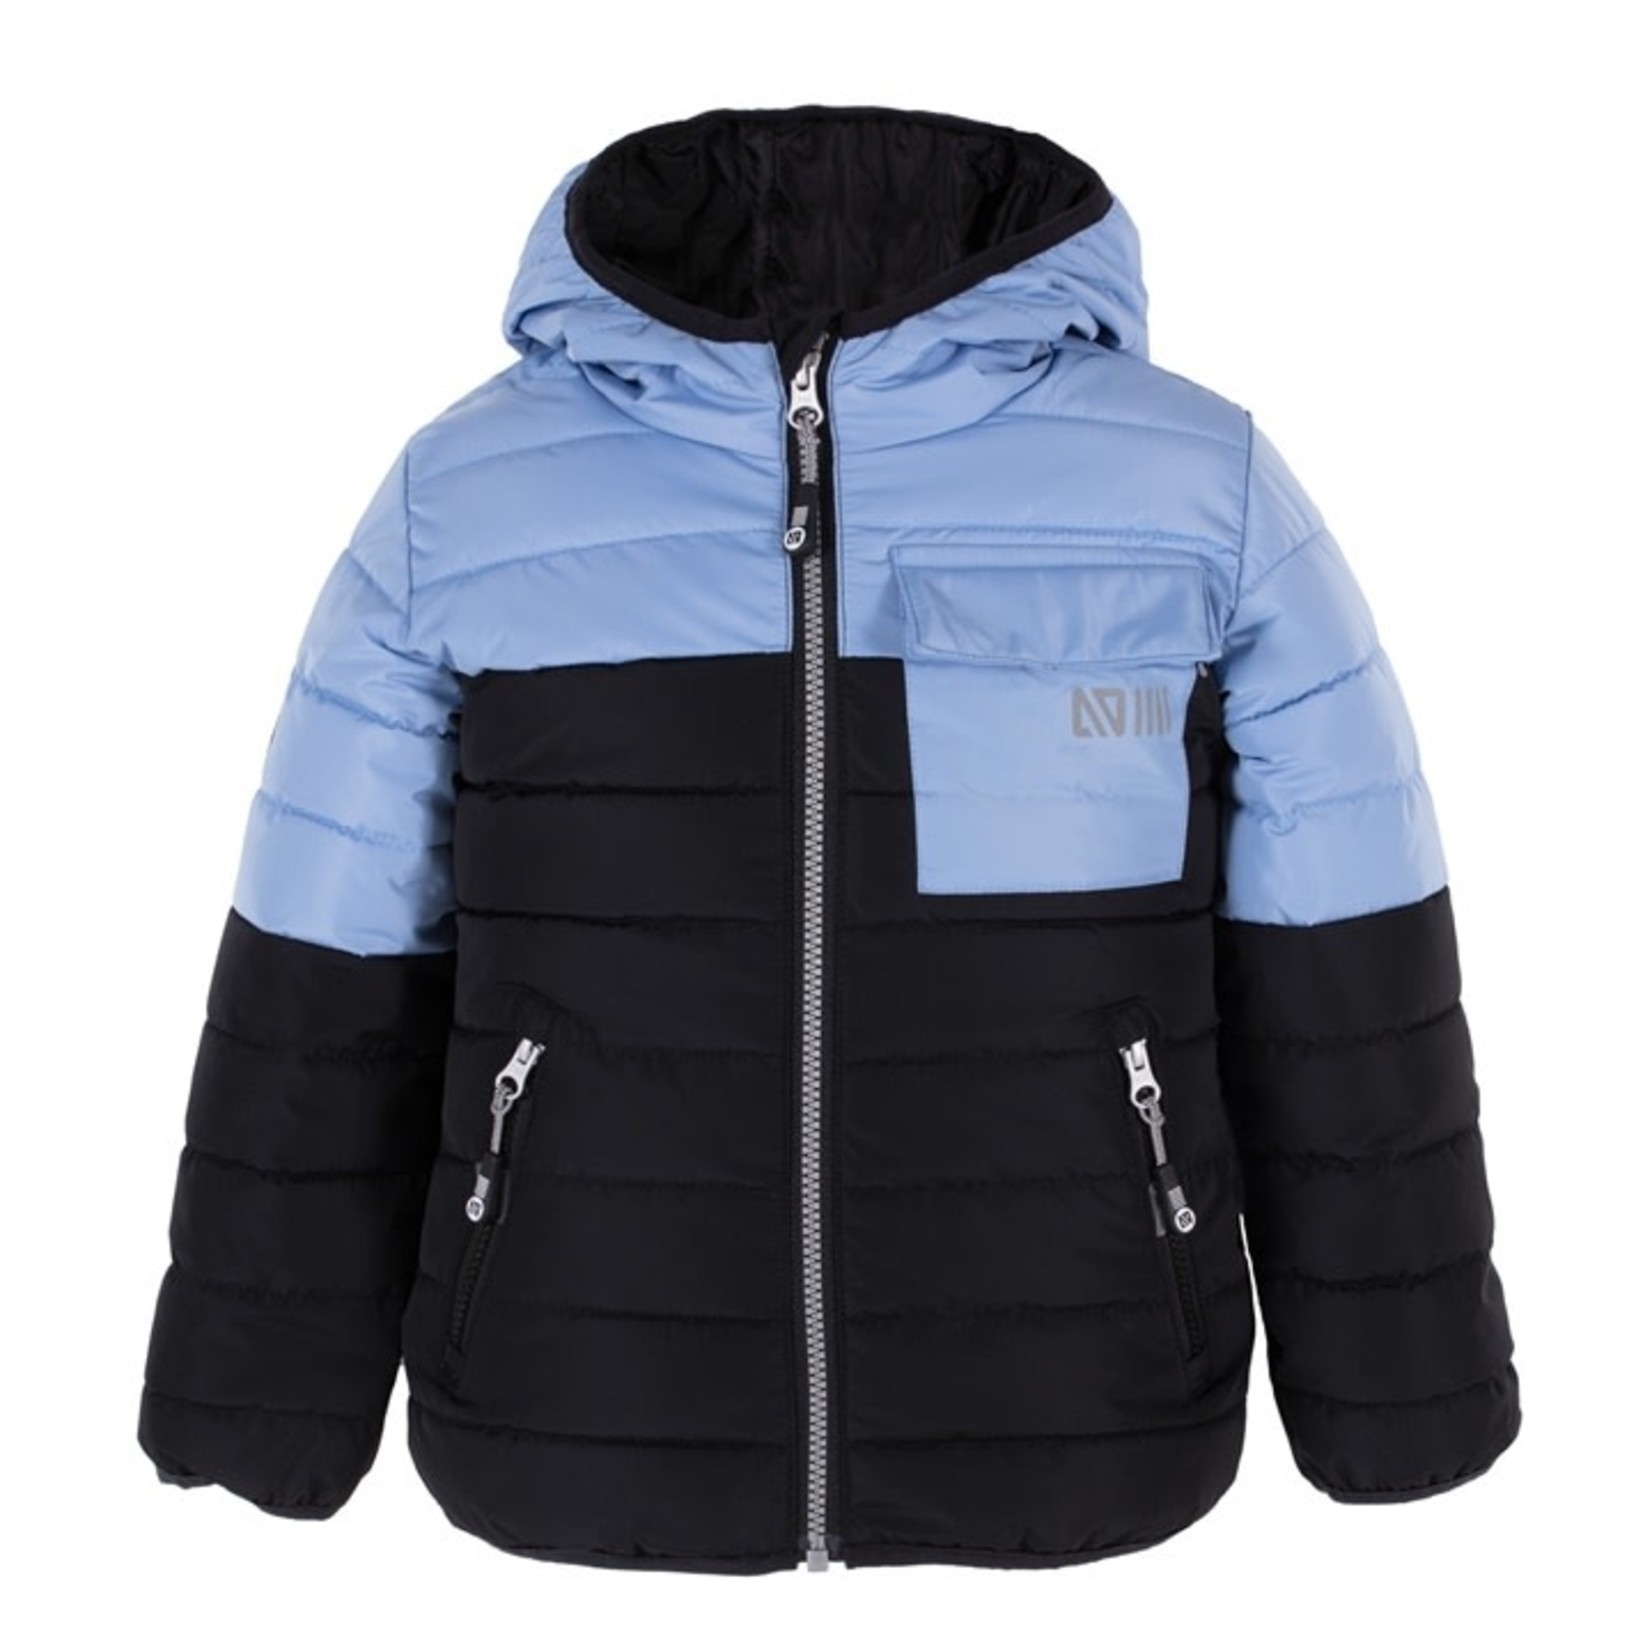 Nanö NANÖ - Quilted fall jacket - Black and light blue